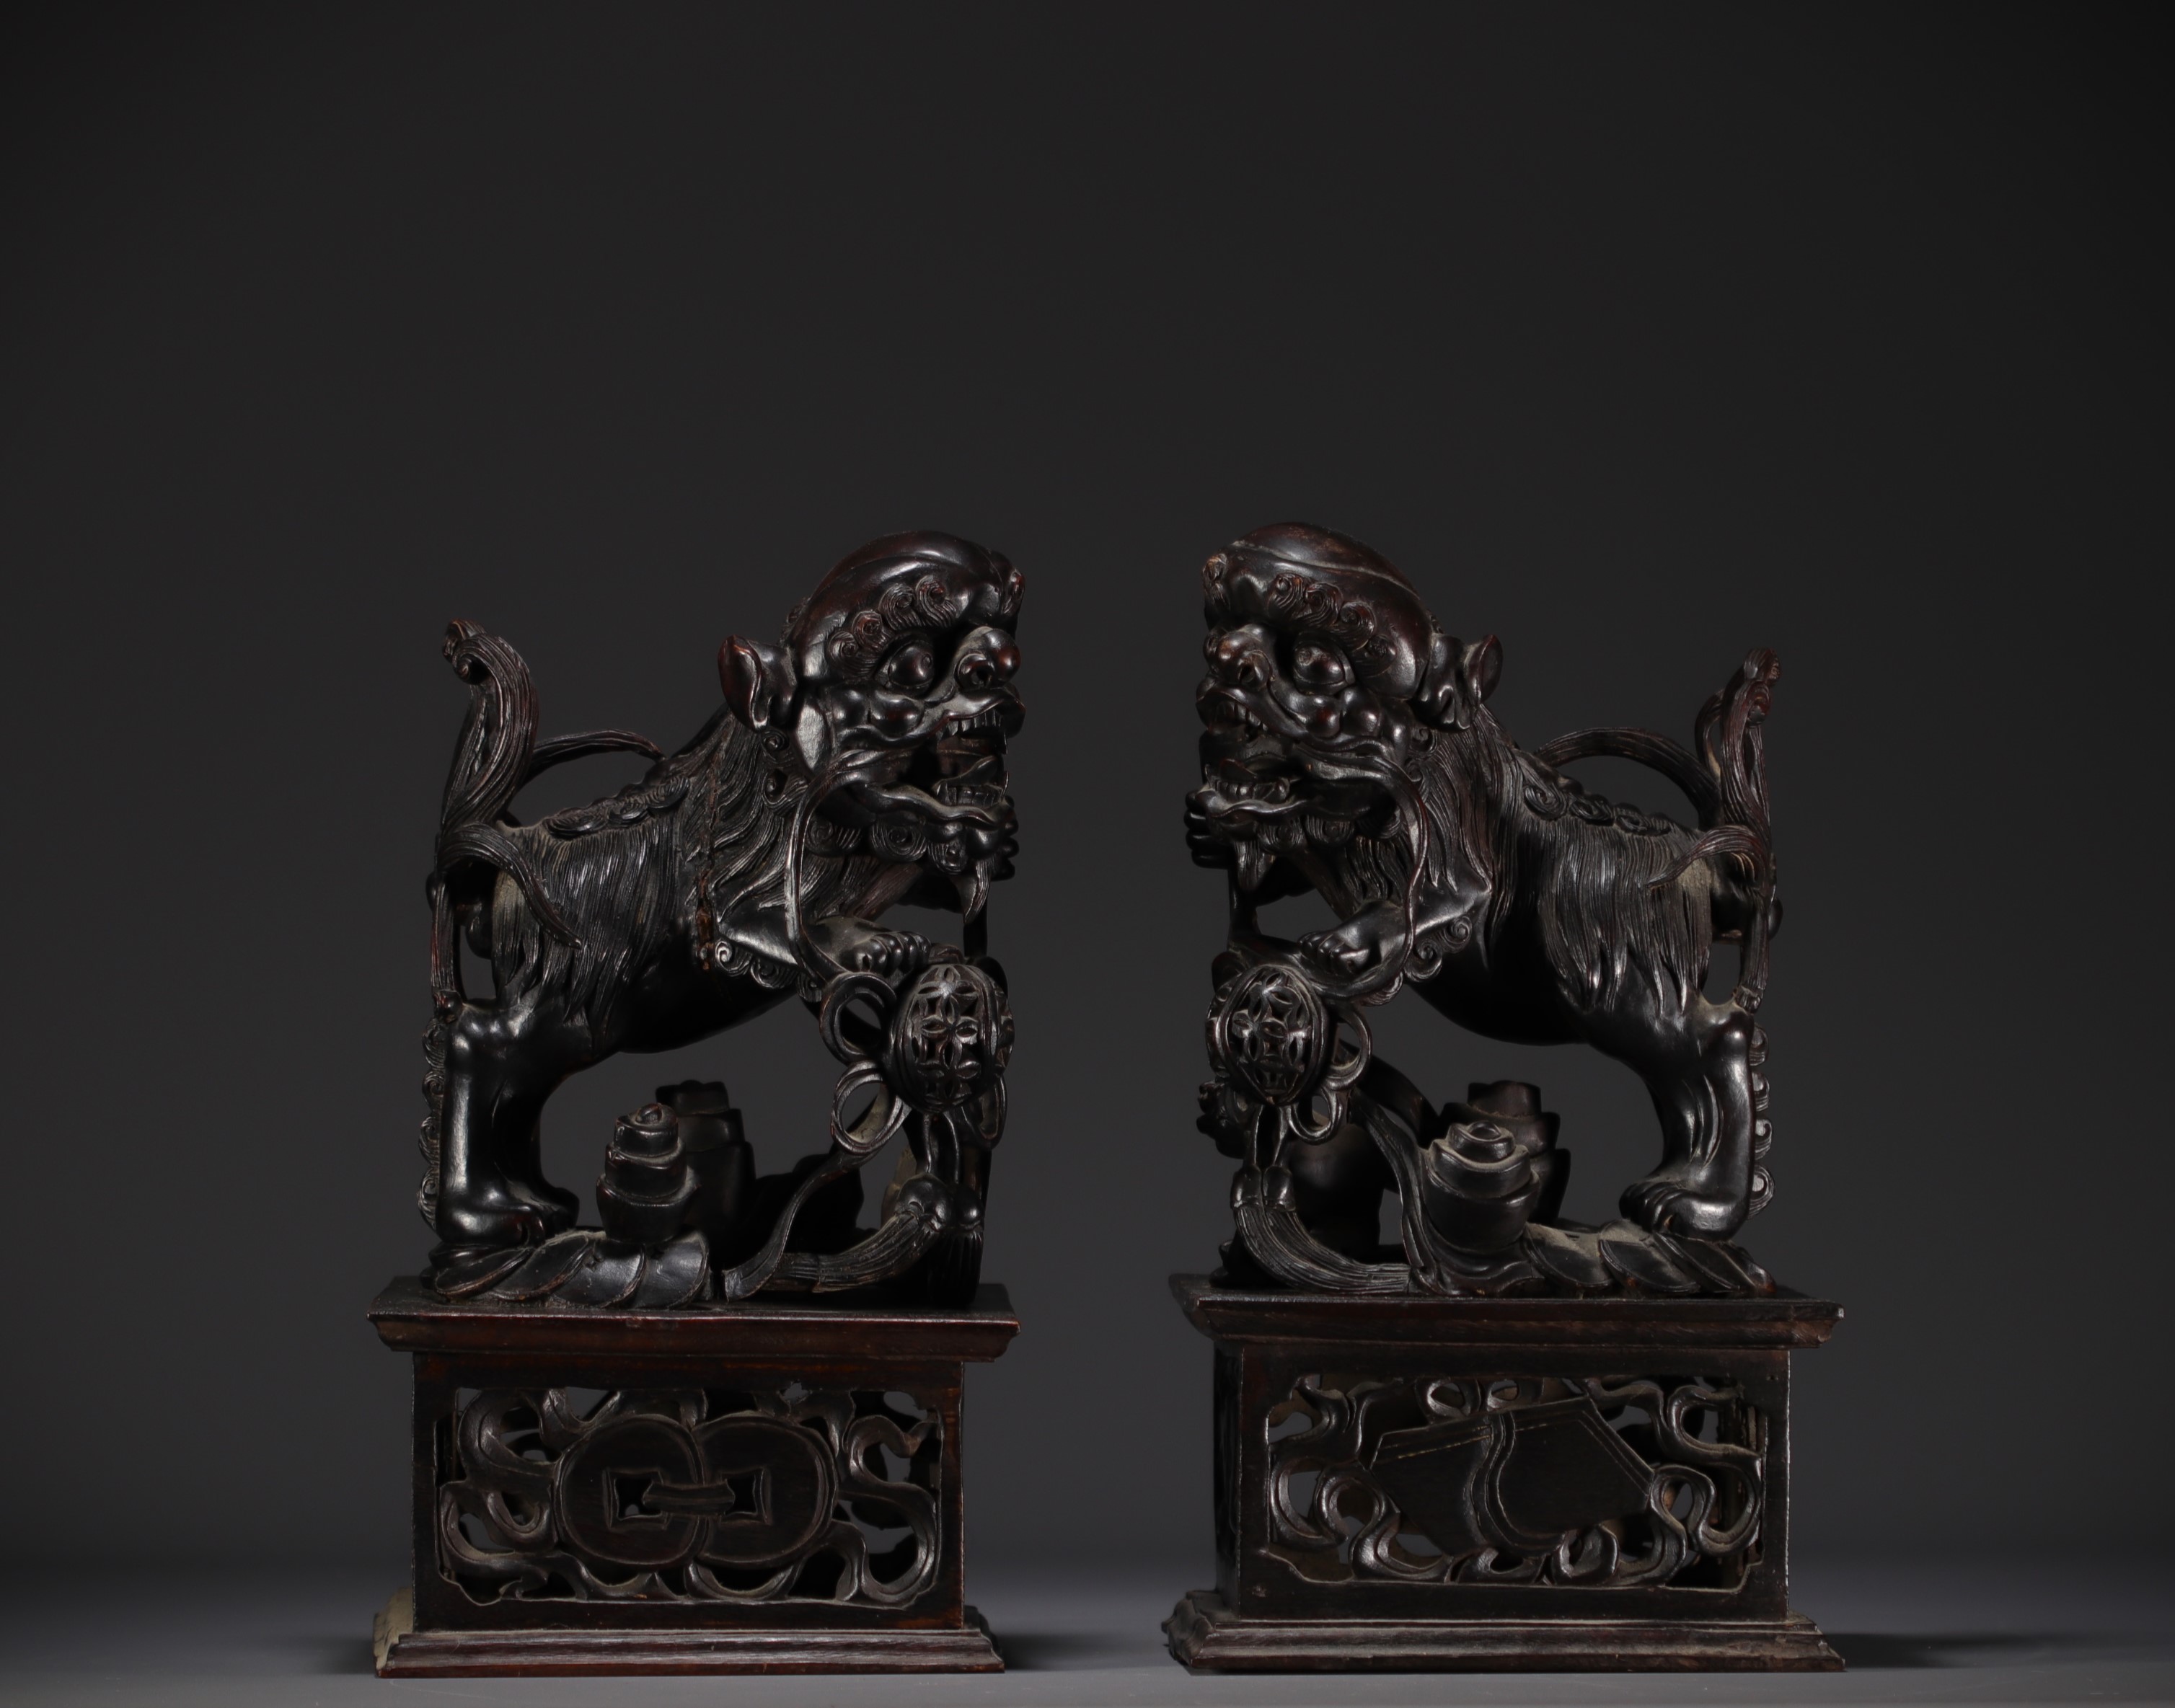 China - Pair of Fo dogs, temple guardians, carved wood, 19th century. - Image 2 of 3